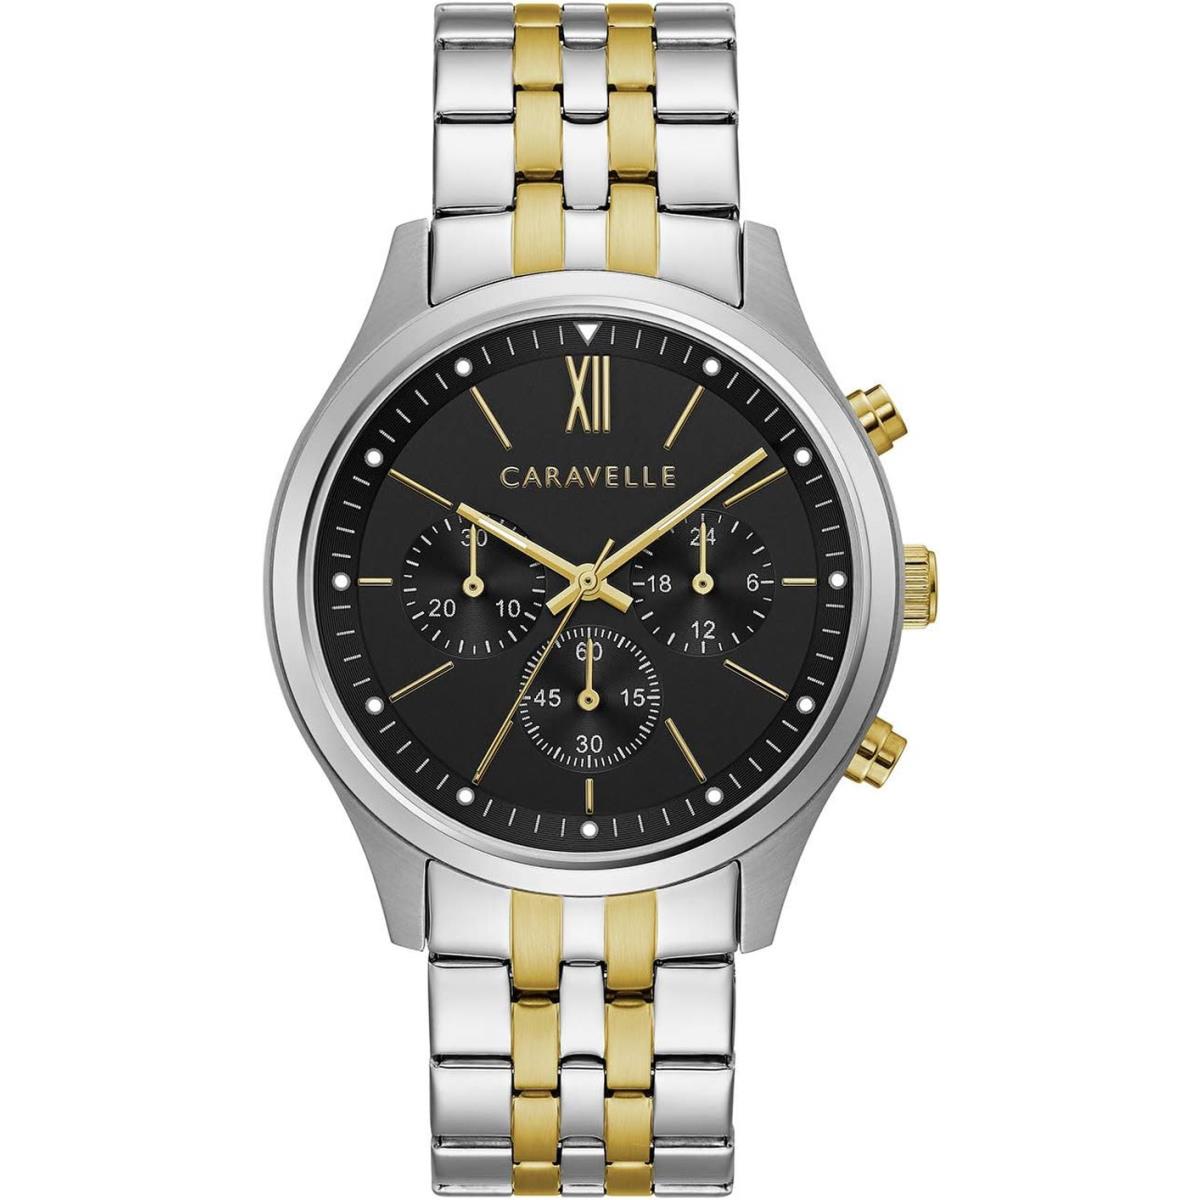 Bulova Caravelle Men`s Chronograph Watch Stainless Steel Two-tone